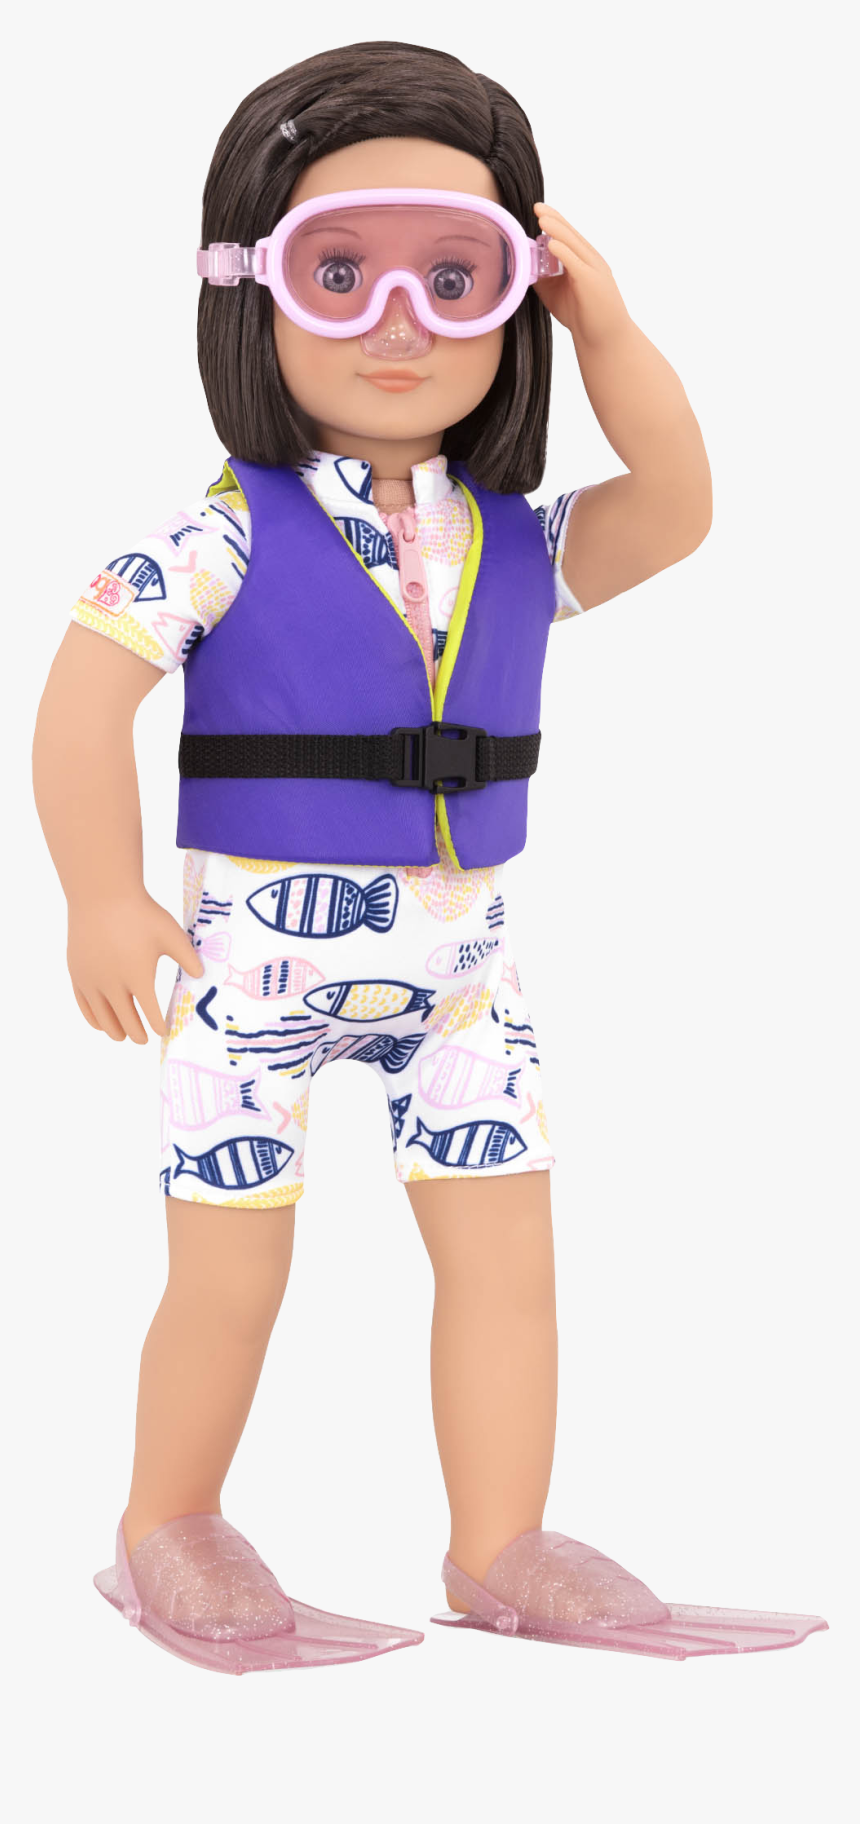 Everly Wearing Mask, Swimsuit, And Life Vest - Our Generation, HD Png Download, Free Download